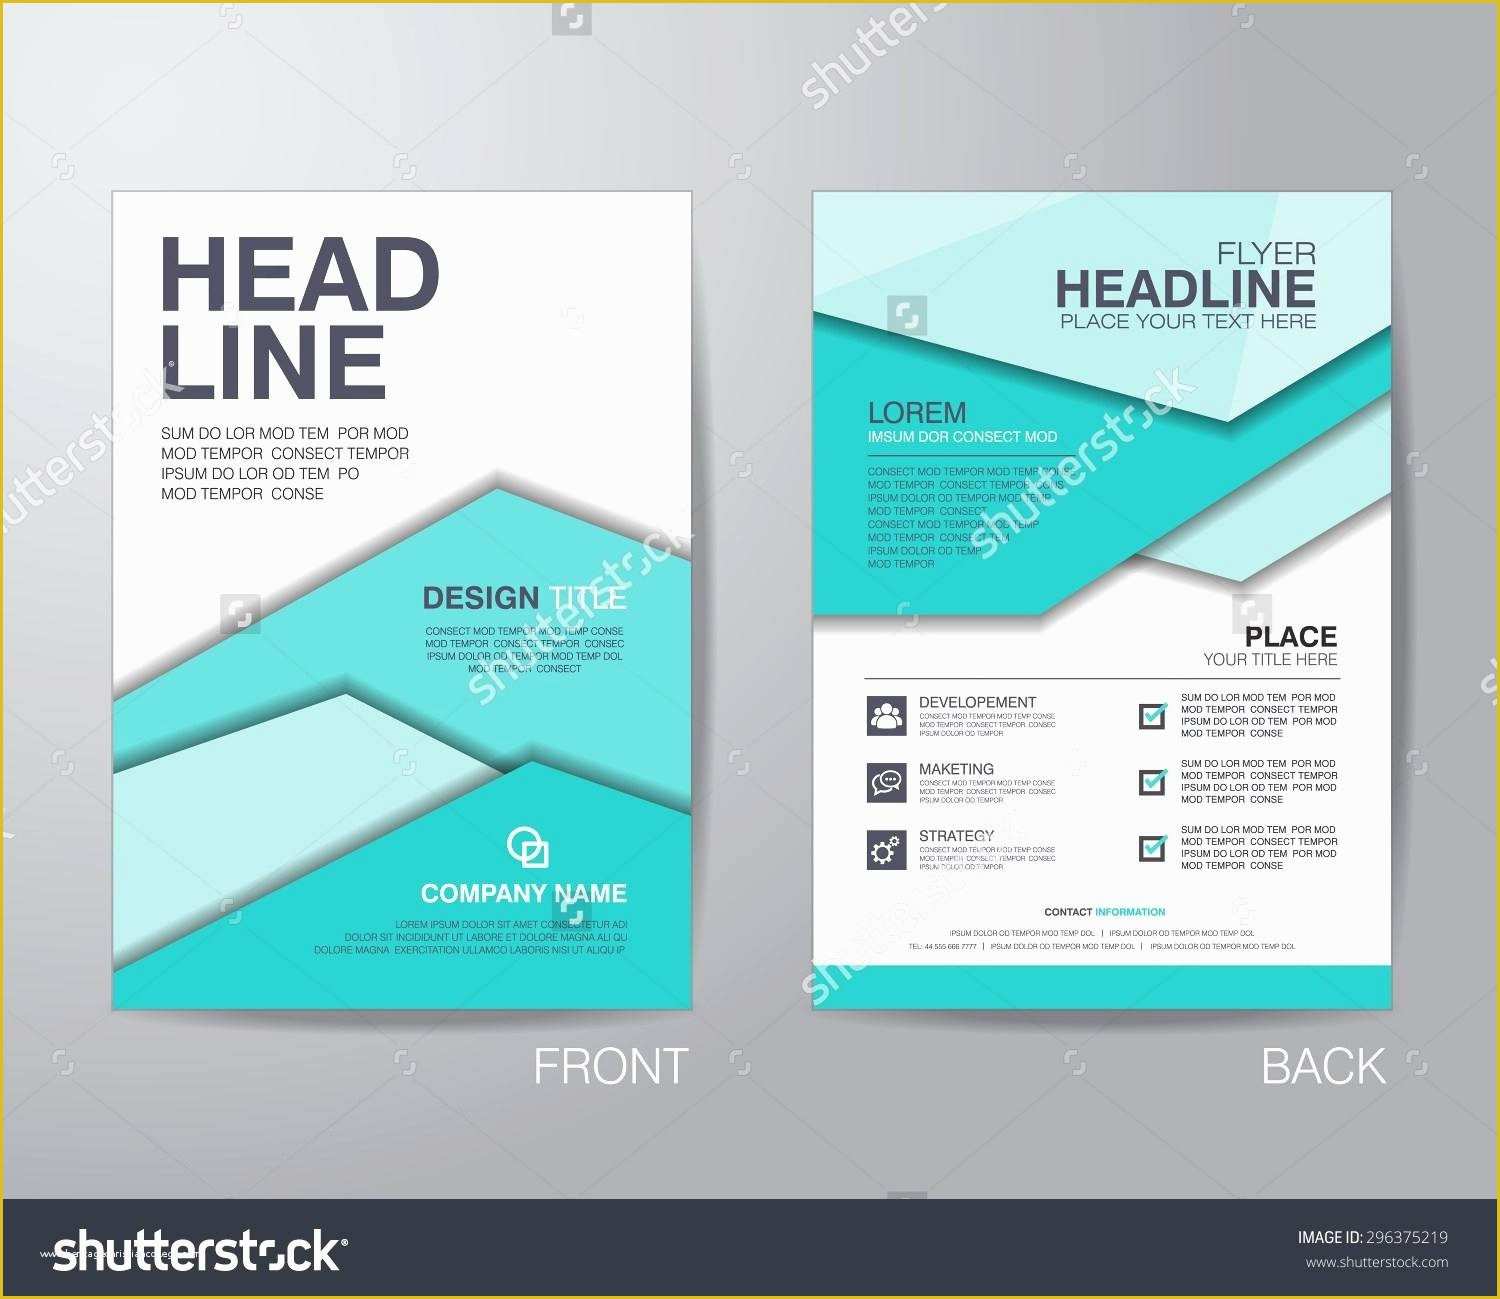 Adobe Business Card Template Free Of Adobe Indesign Business Card Template Beautiful Adobe